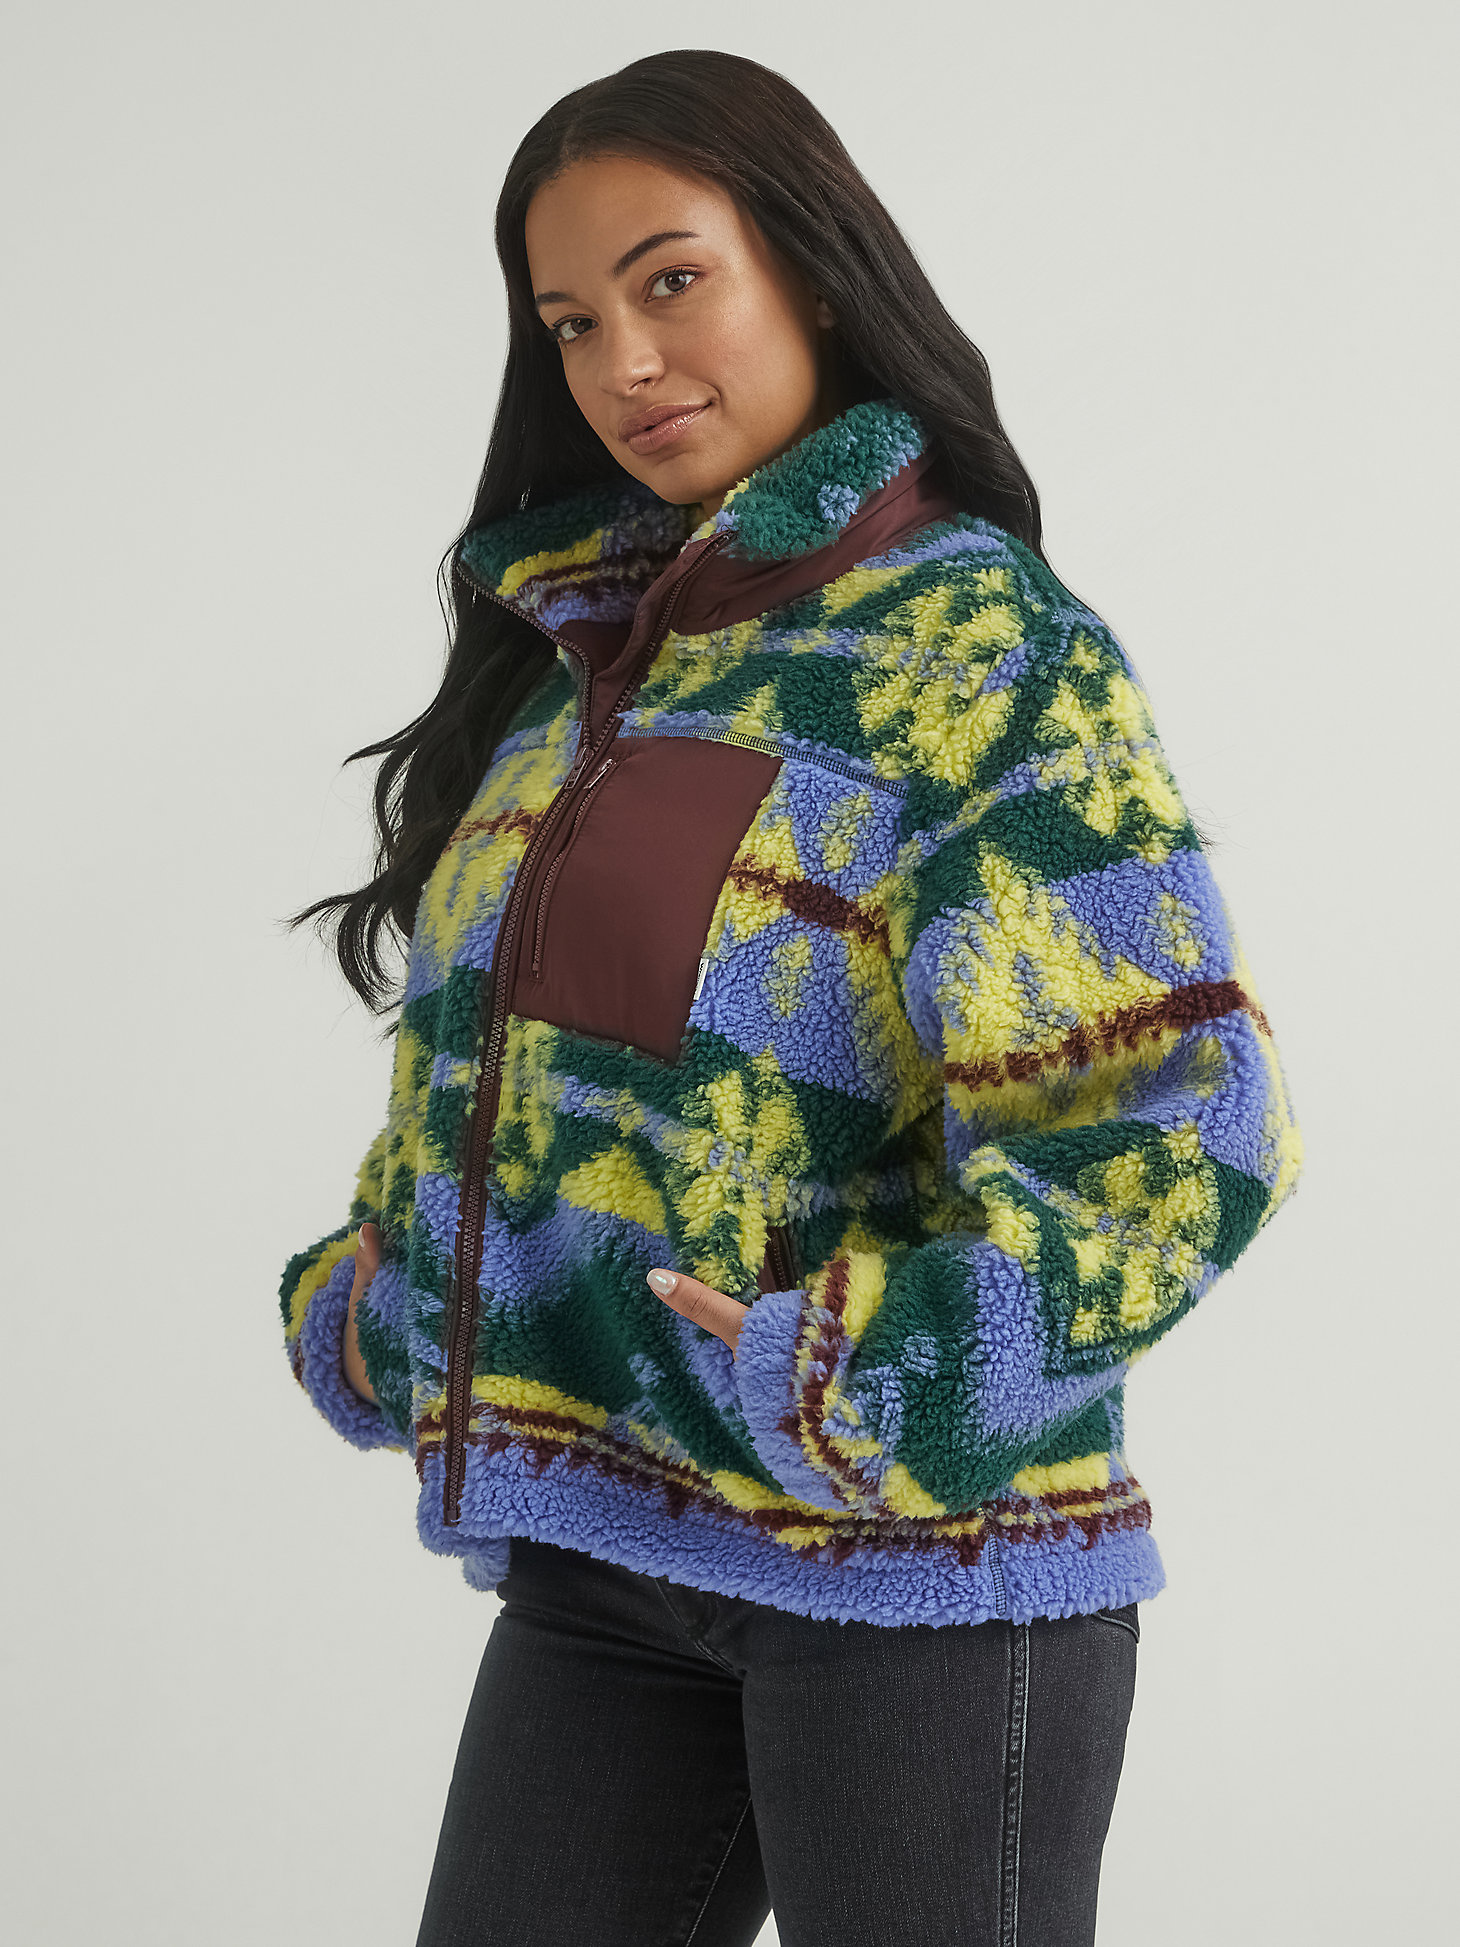 Women's All Over Printed Sherpa Jacket in Very Peri Purple alternative view 1